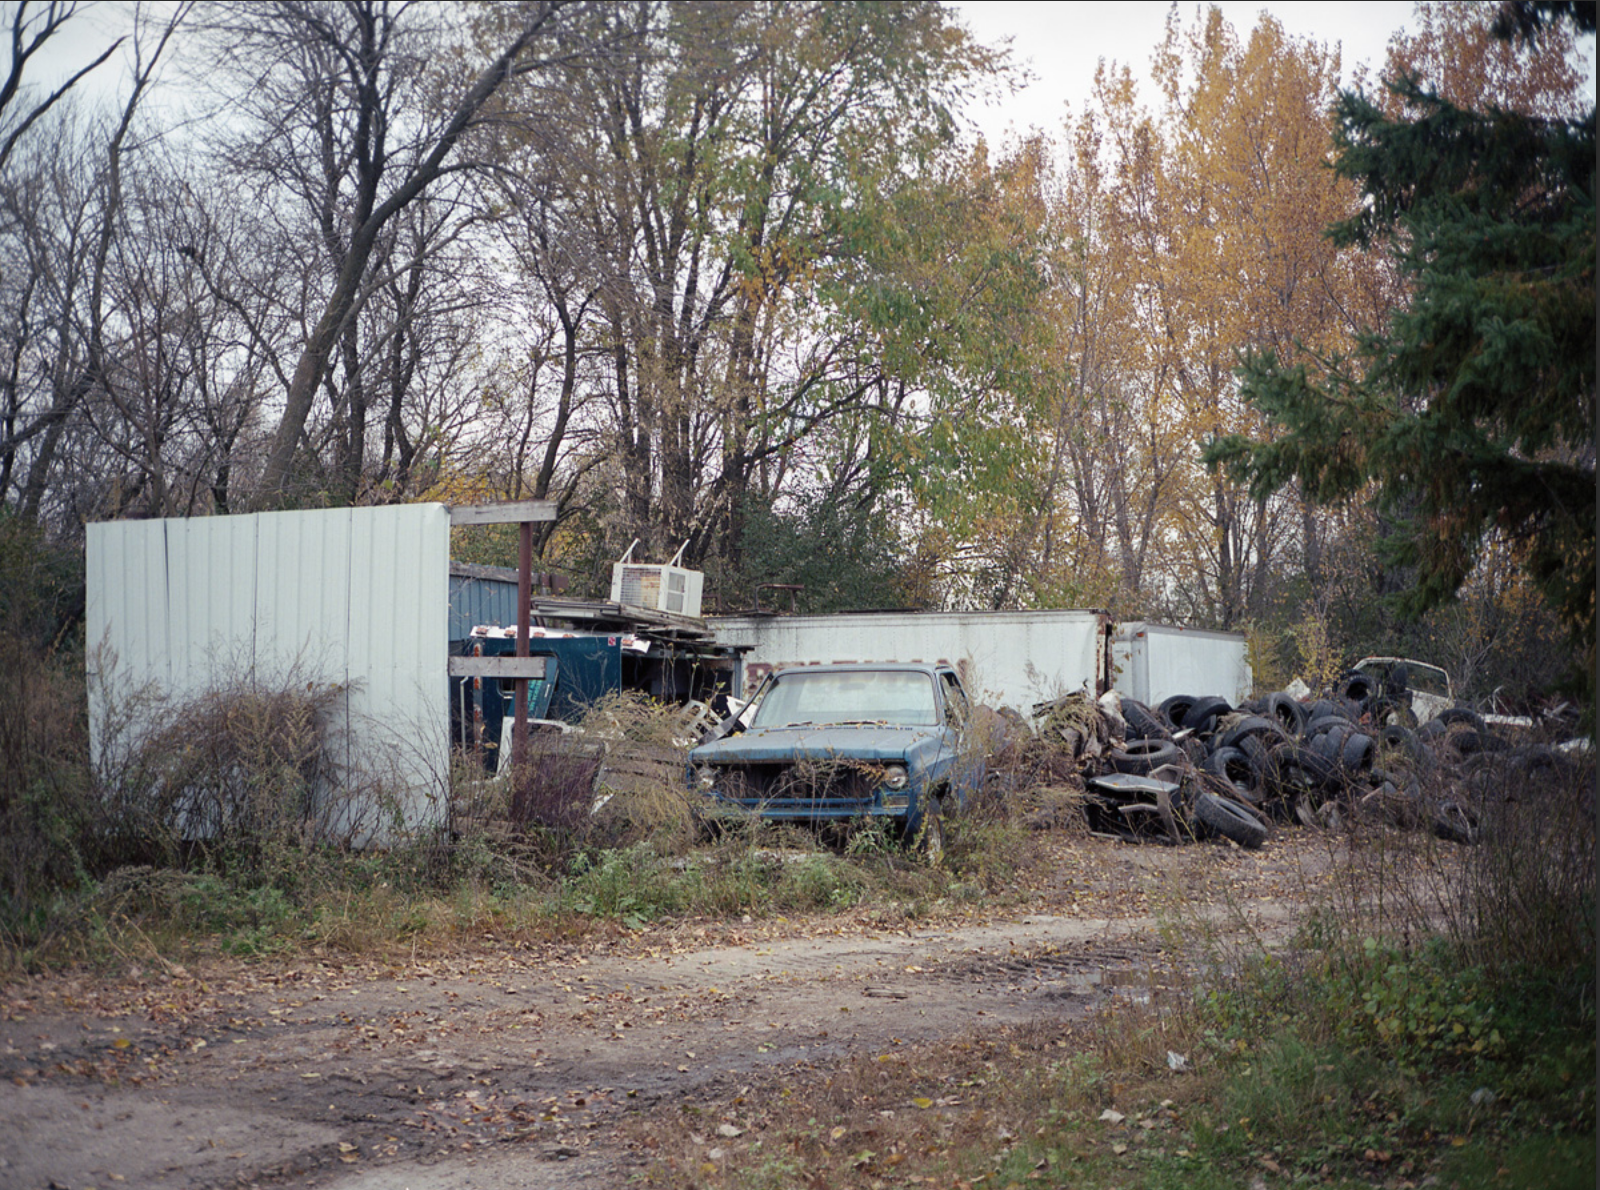 Scrap yard off 3rd Ave. in Elrosa, Minnesota. Image by Kalen Goodluck. United States, undated.